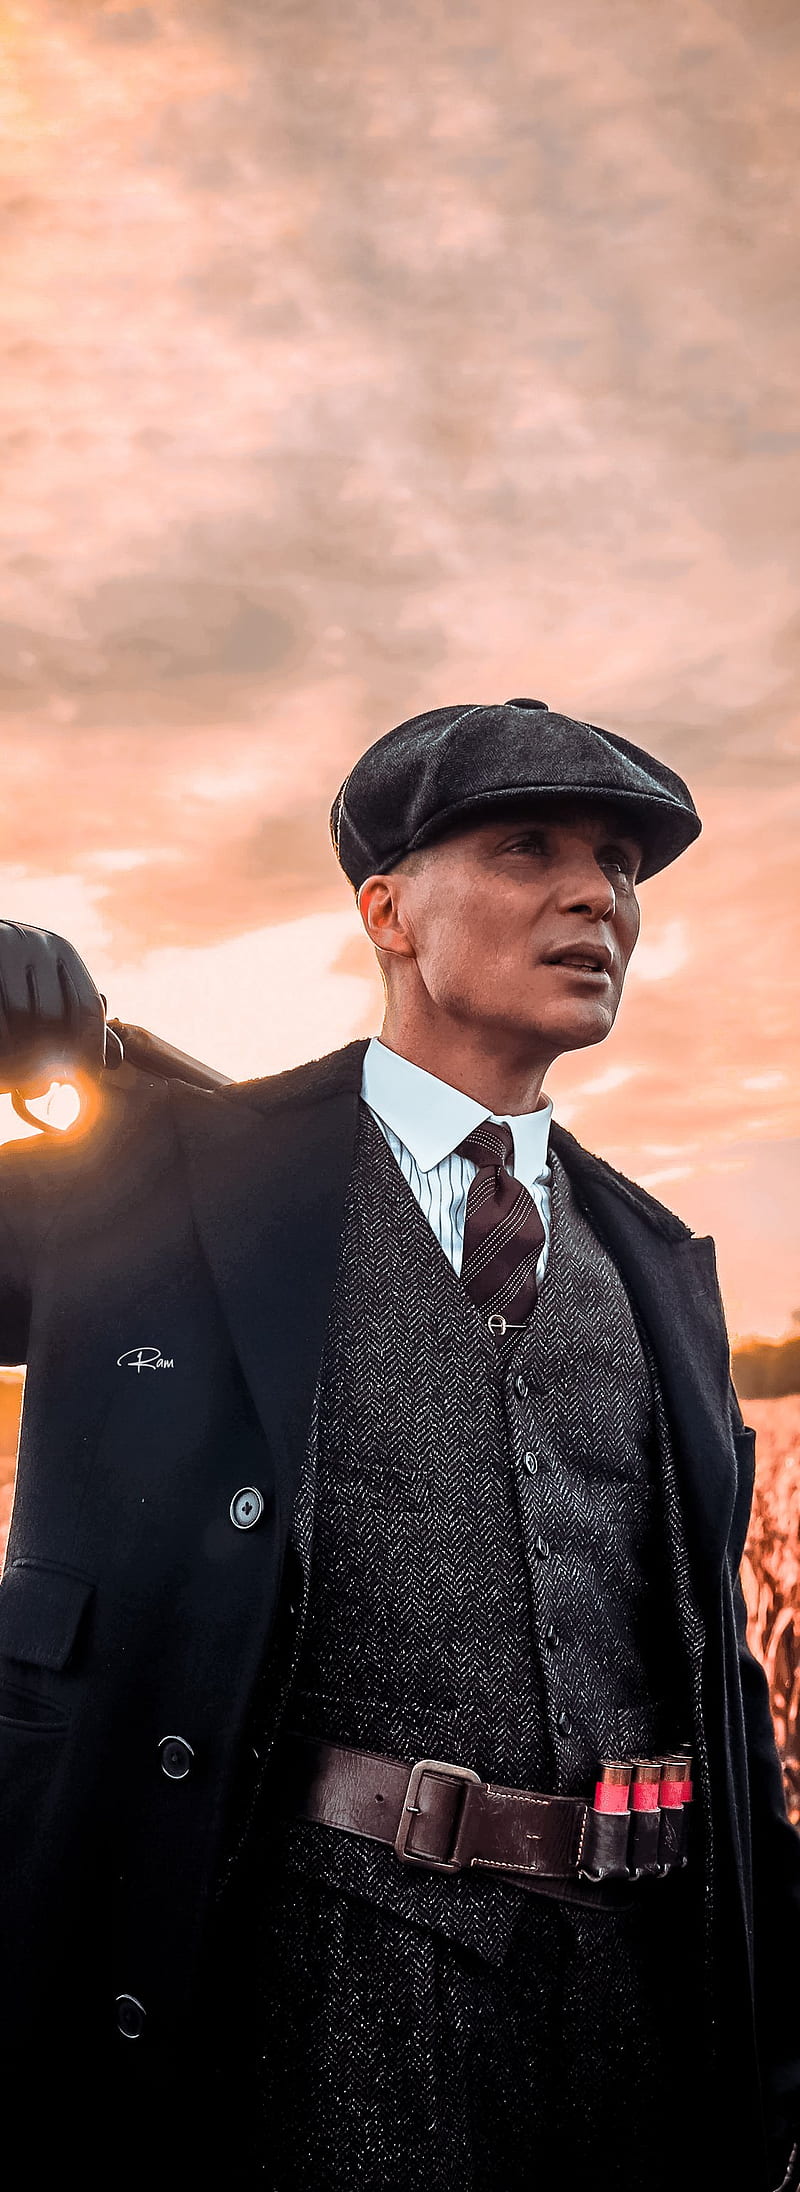 Tommy shelby wallpaper by the_peaky_blinder - Download on ZEDGE™ | d9eb